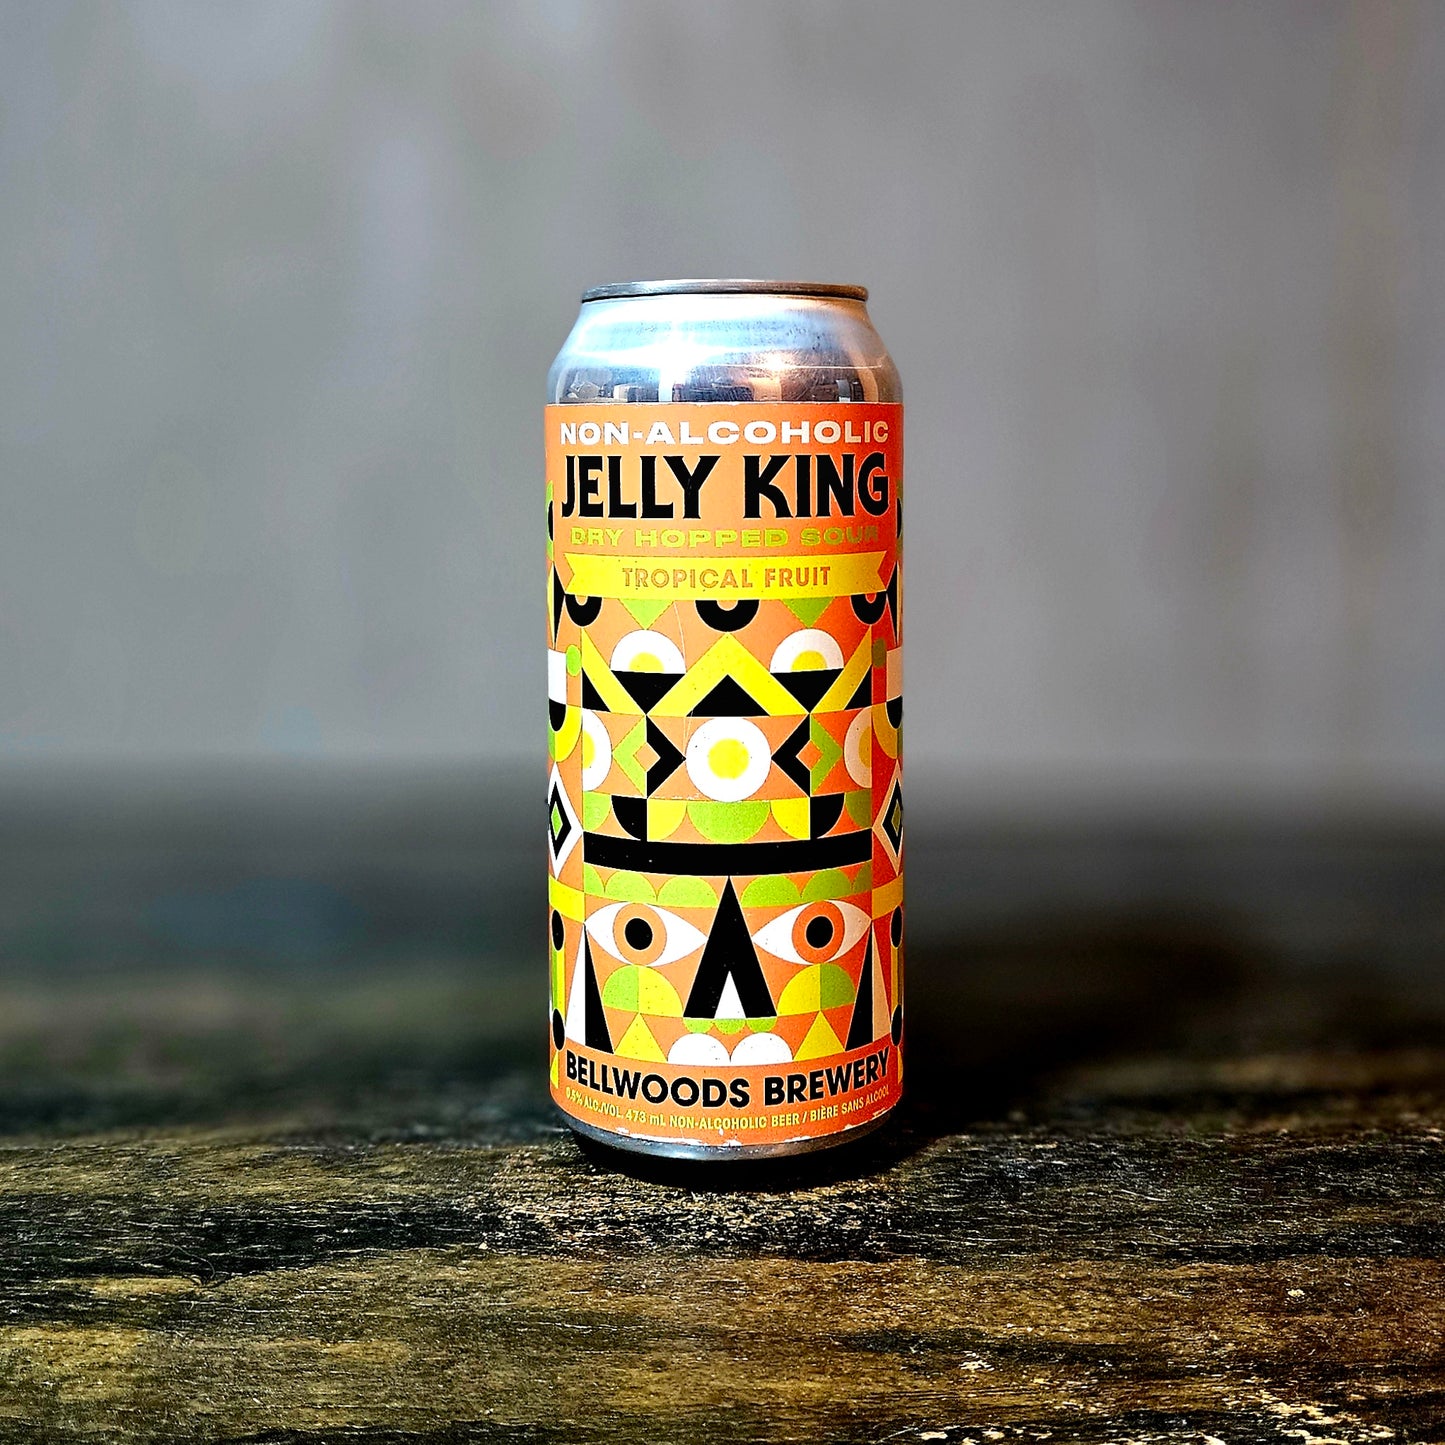 Bellwoods "Jelly King" Non-Alcoholic Tropical Dry-Hopped Sour